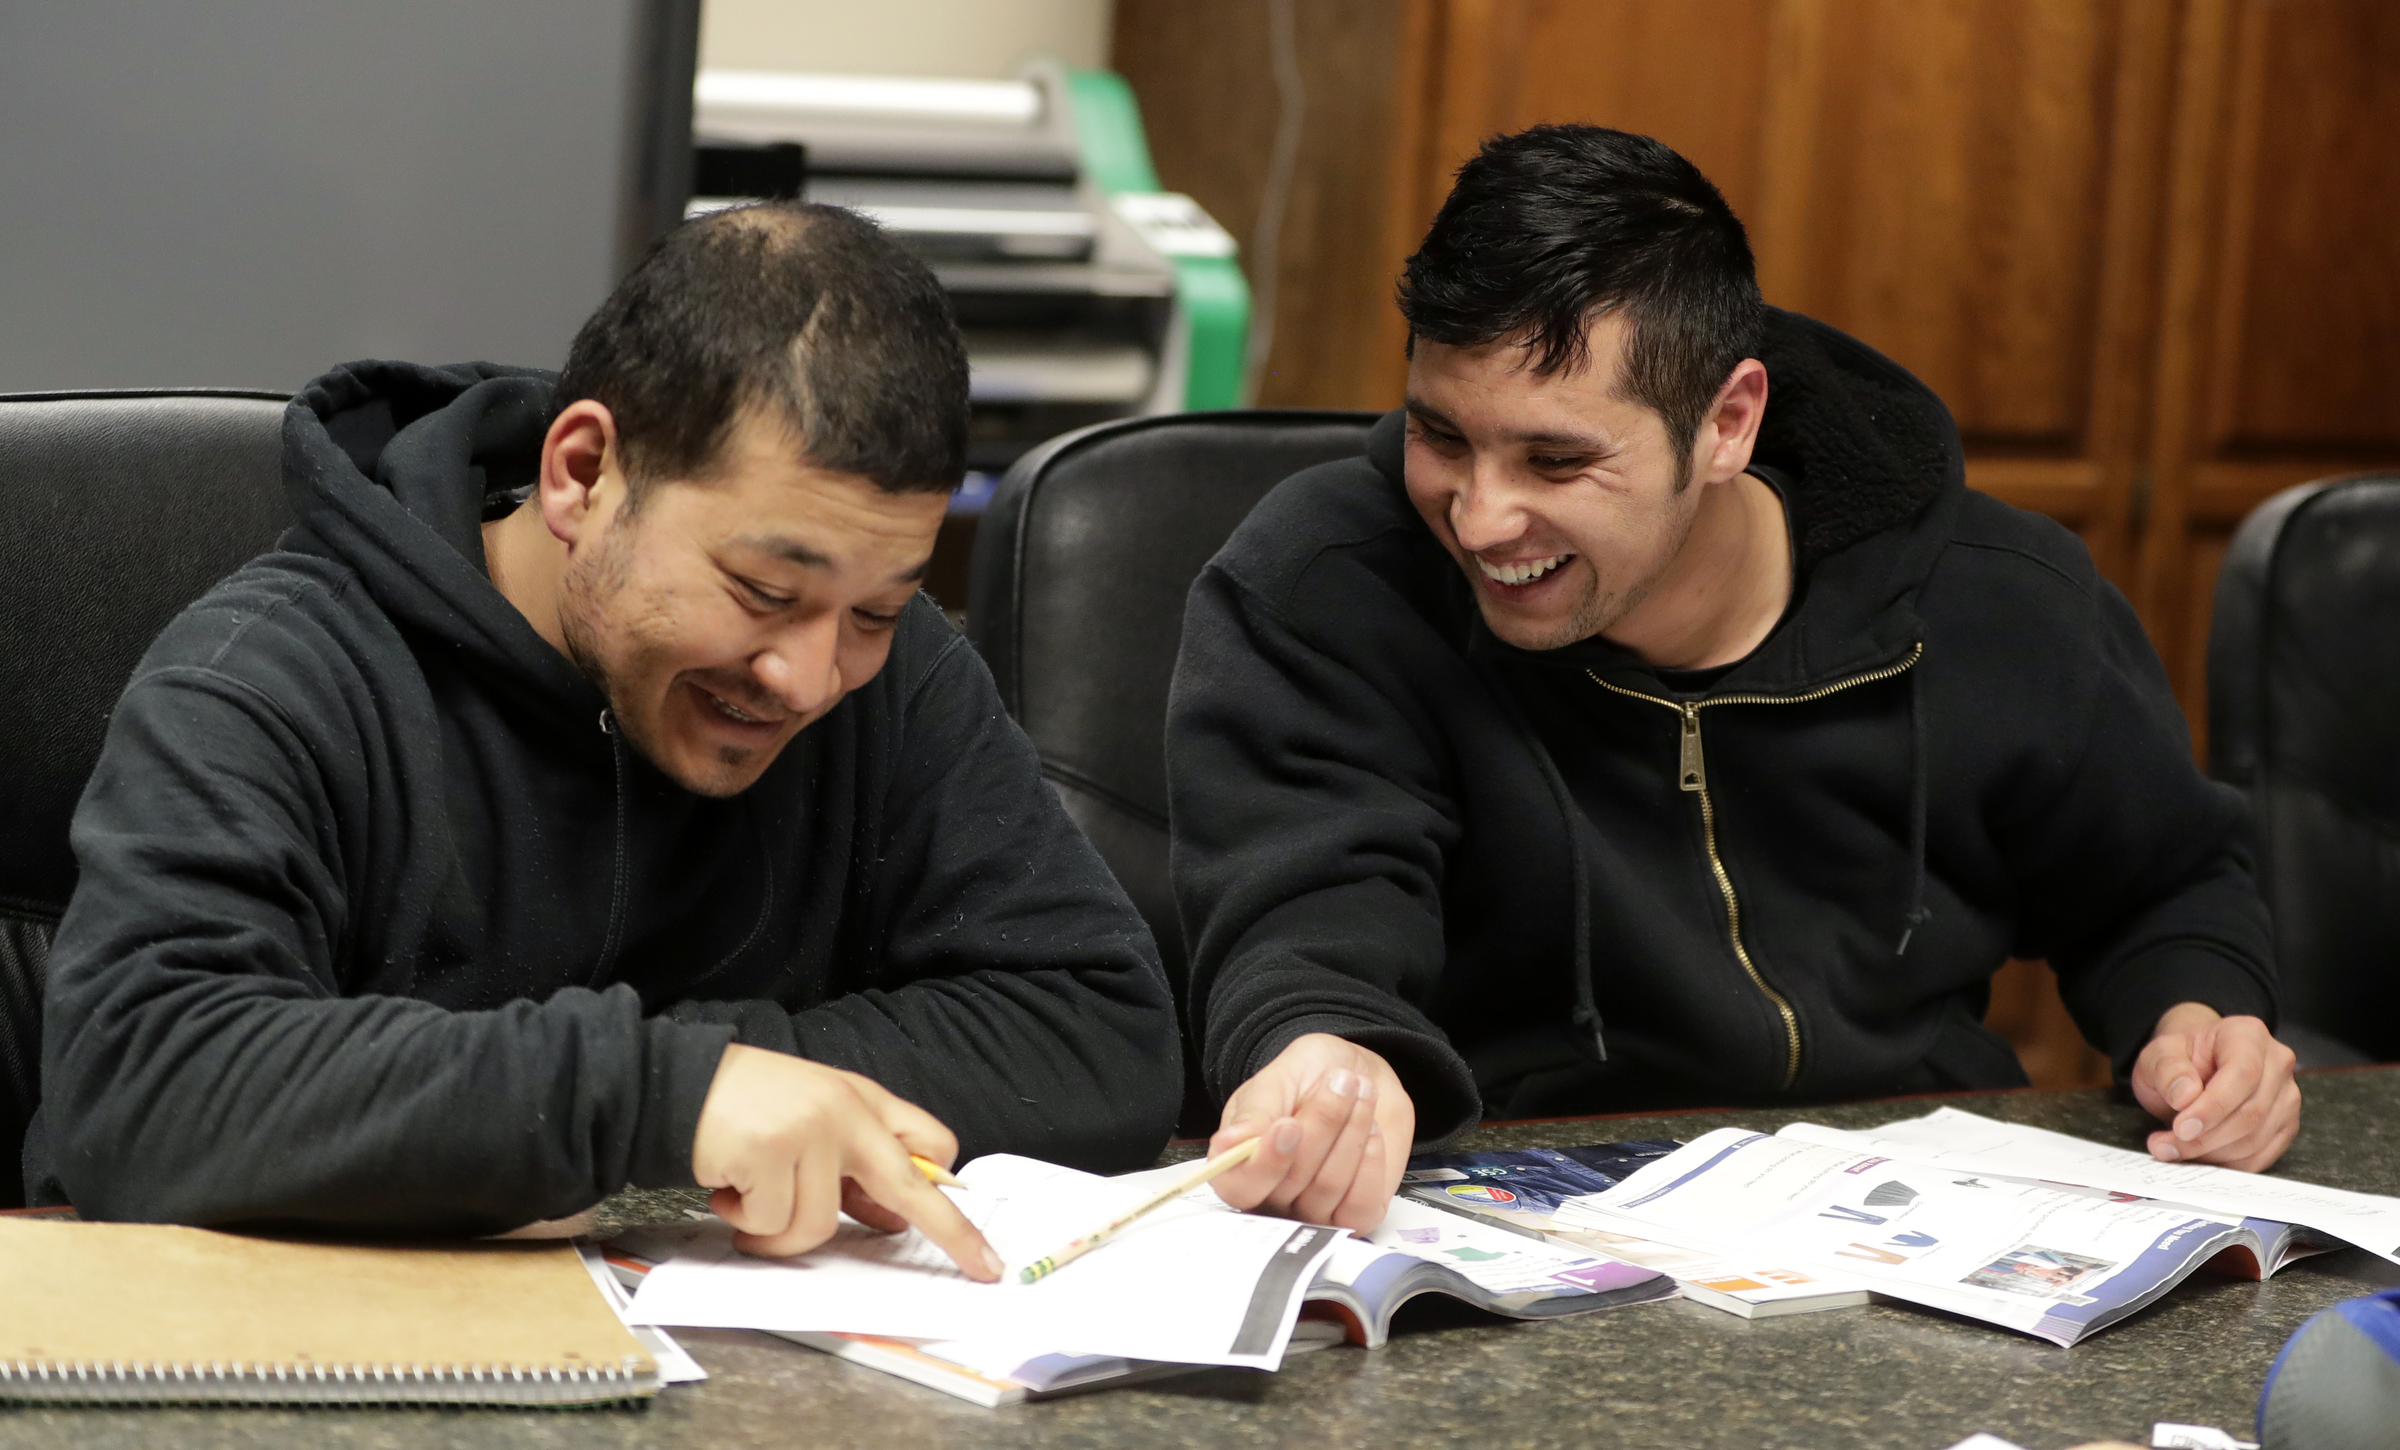 Mohammad Ali Afshar, right, and Hedaiatullah Azim participate in an English class on April 14, 2022, at Faith Lutheran Church in Allouez, Wis. Before fleeing the country, both defended the U.S. Embassy in Kabul as part of the Afghanistan military’s special operations, said Mike Ruminski, who has helped Afghan evacuees obtain their driver’s licenses, enroll in English classes and connect with job specialists. (Sarah Kloepping/USA TODAY NETWORK-Wisconsin)